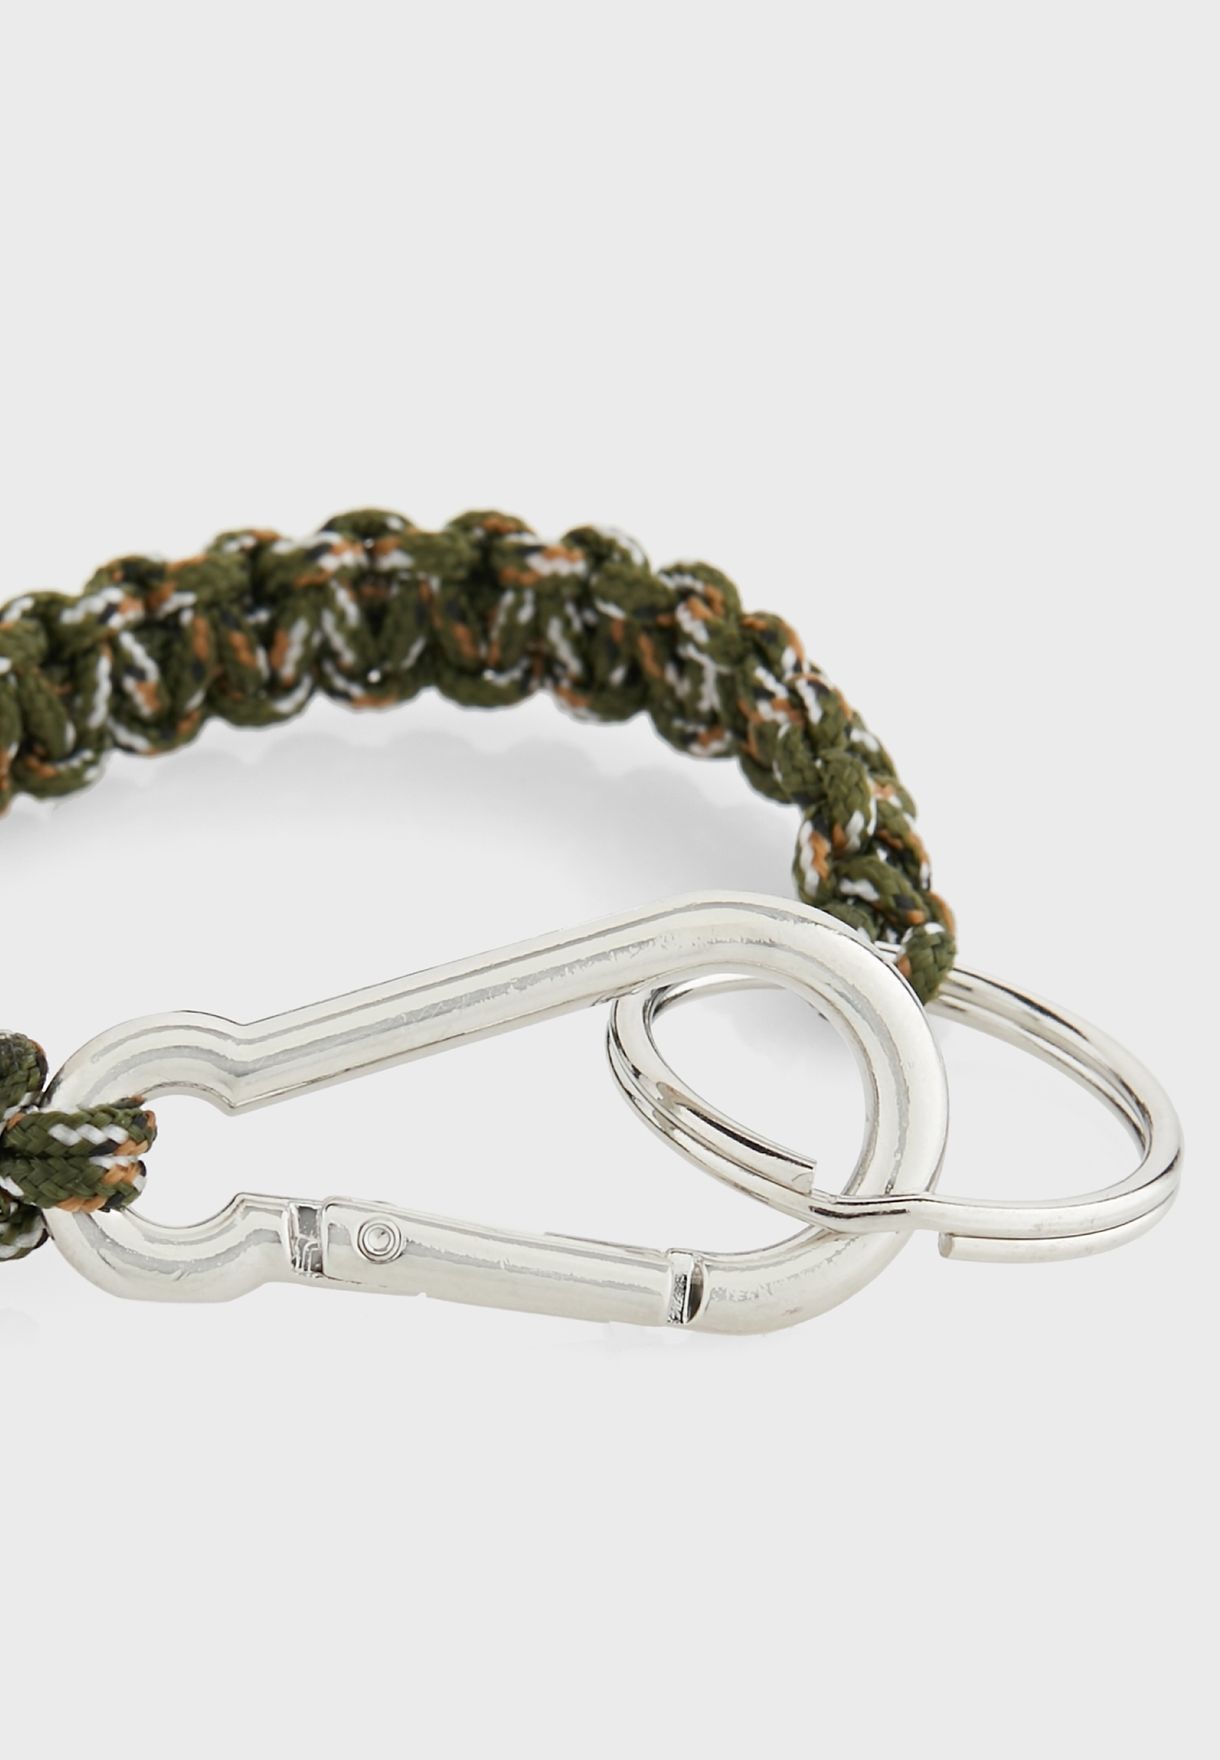 Knot Cord With Carabiner Bracelet